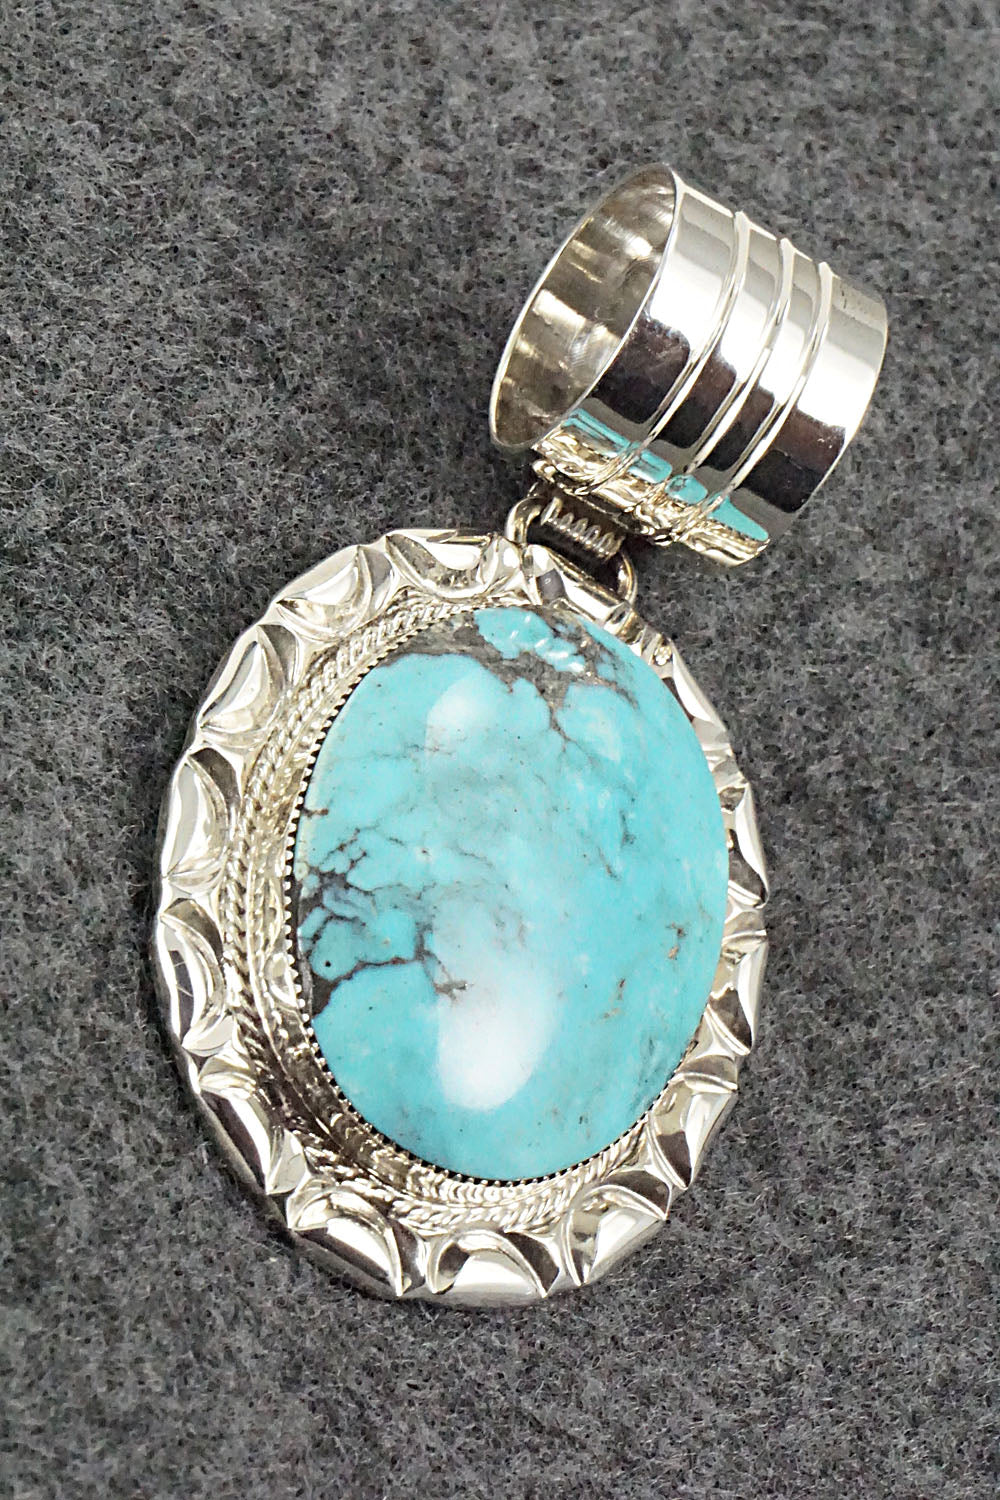 Turquoise & Sterling Silver Pendant - Gregg Yazzie